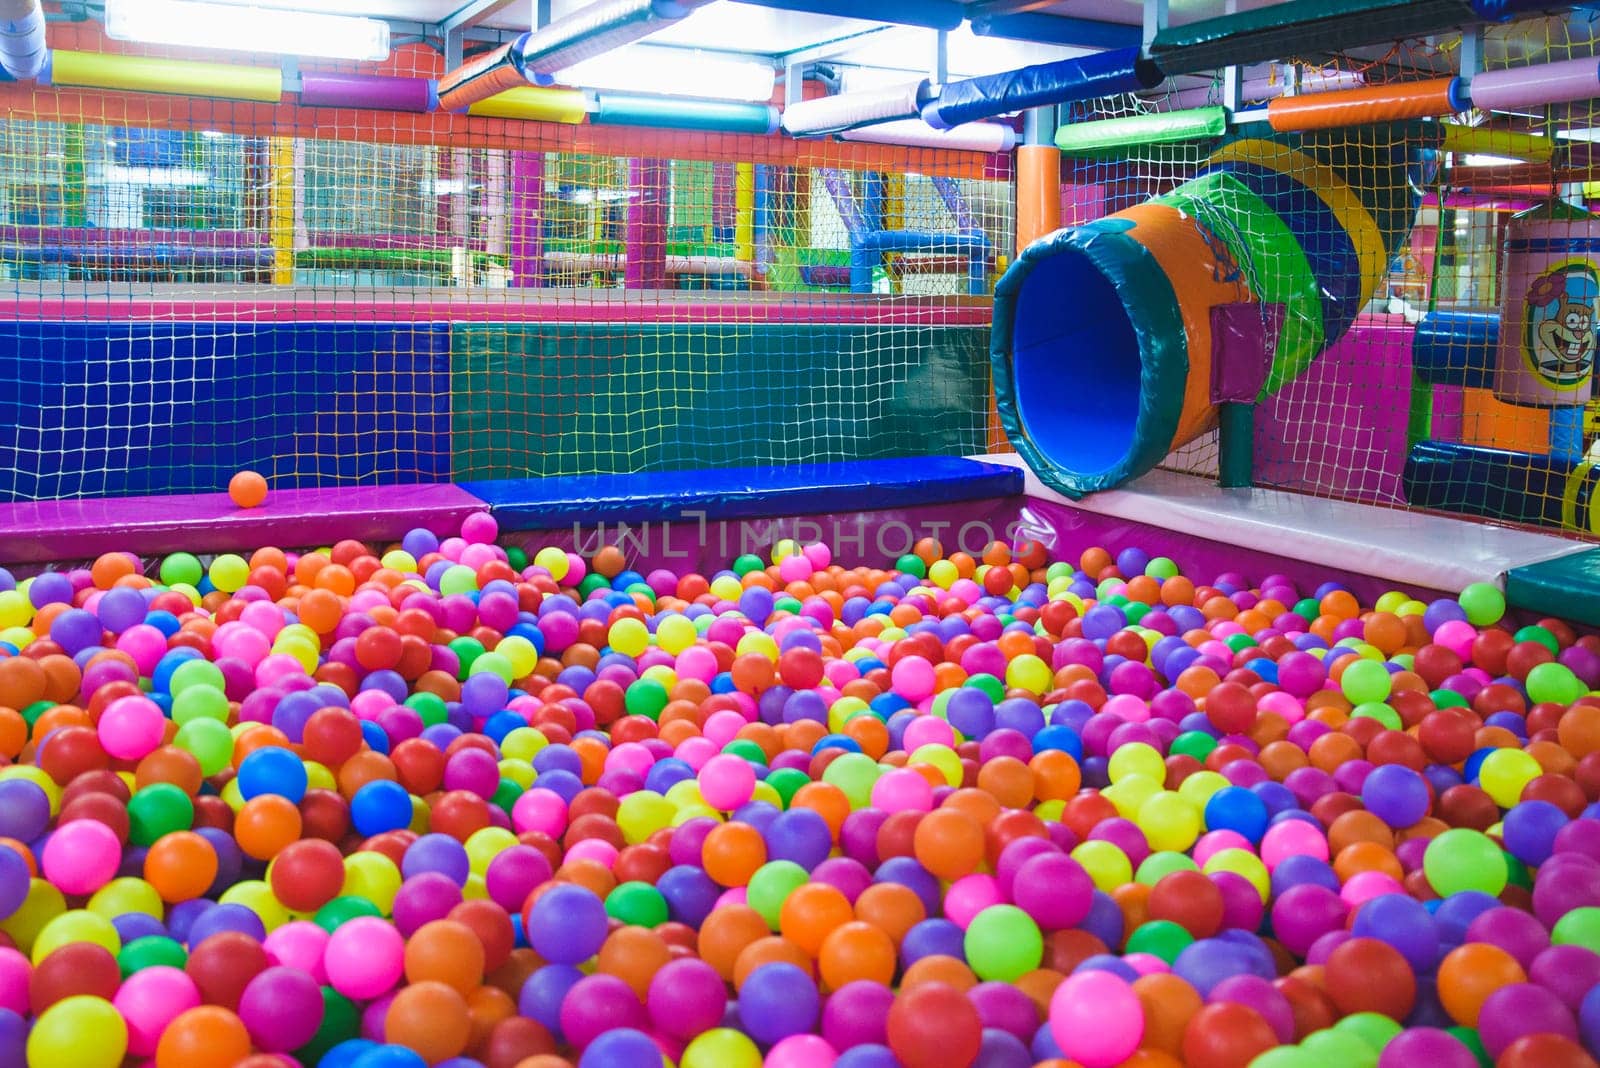 Indoor playground with colorful plastic balls for children by jcdiazhidalgo